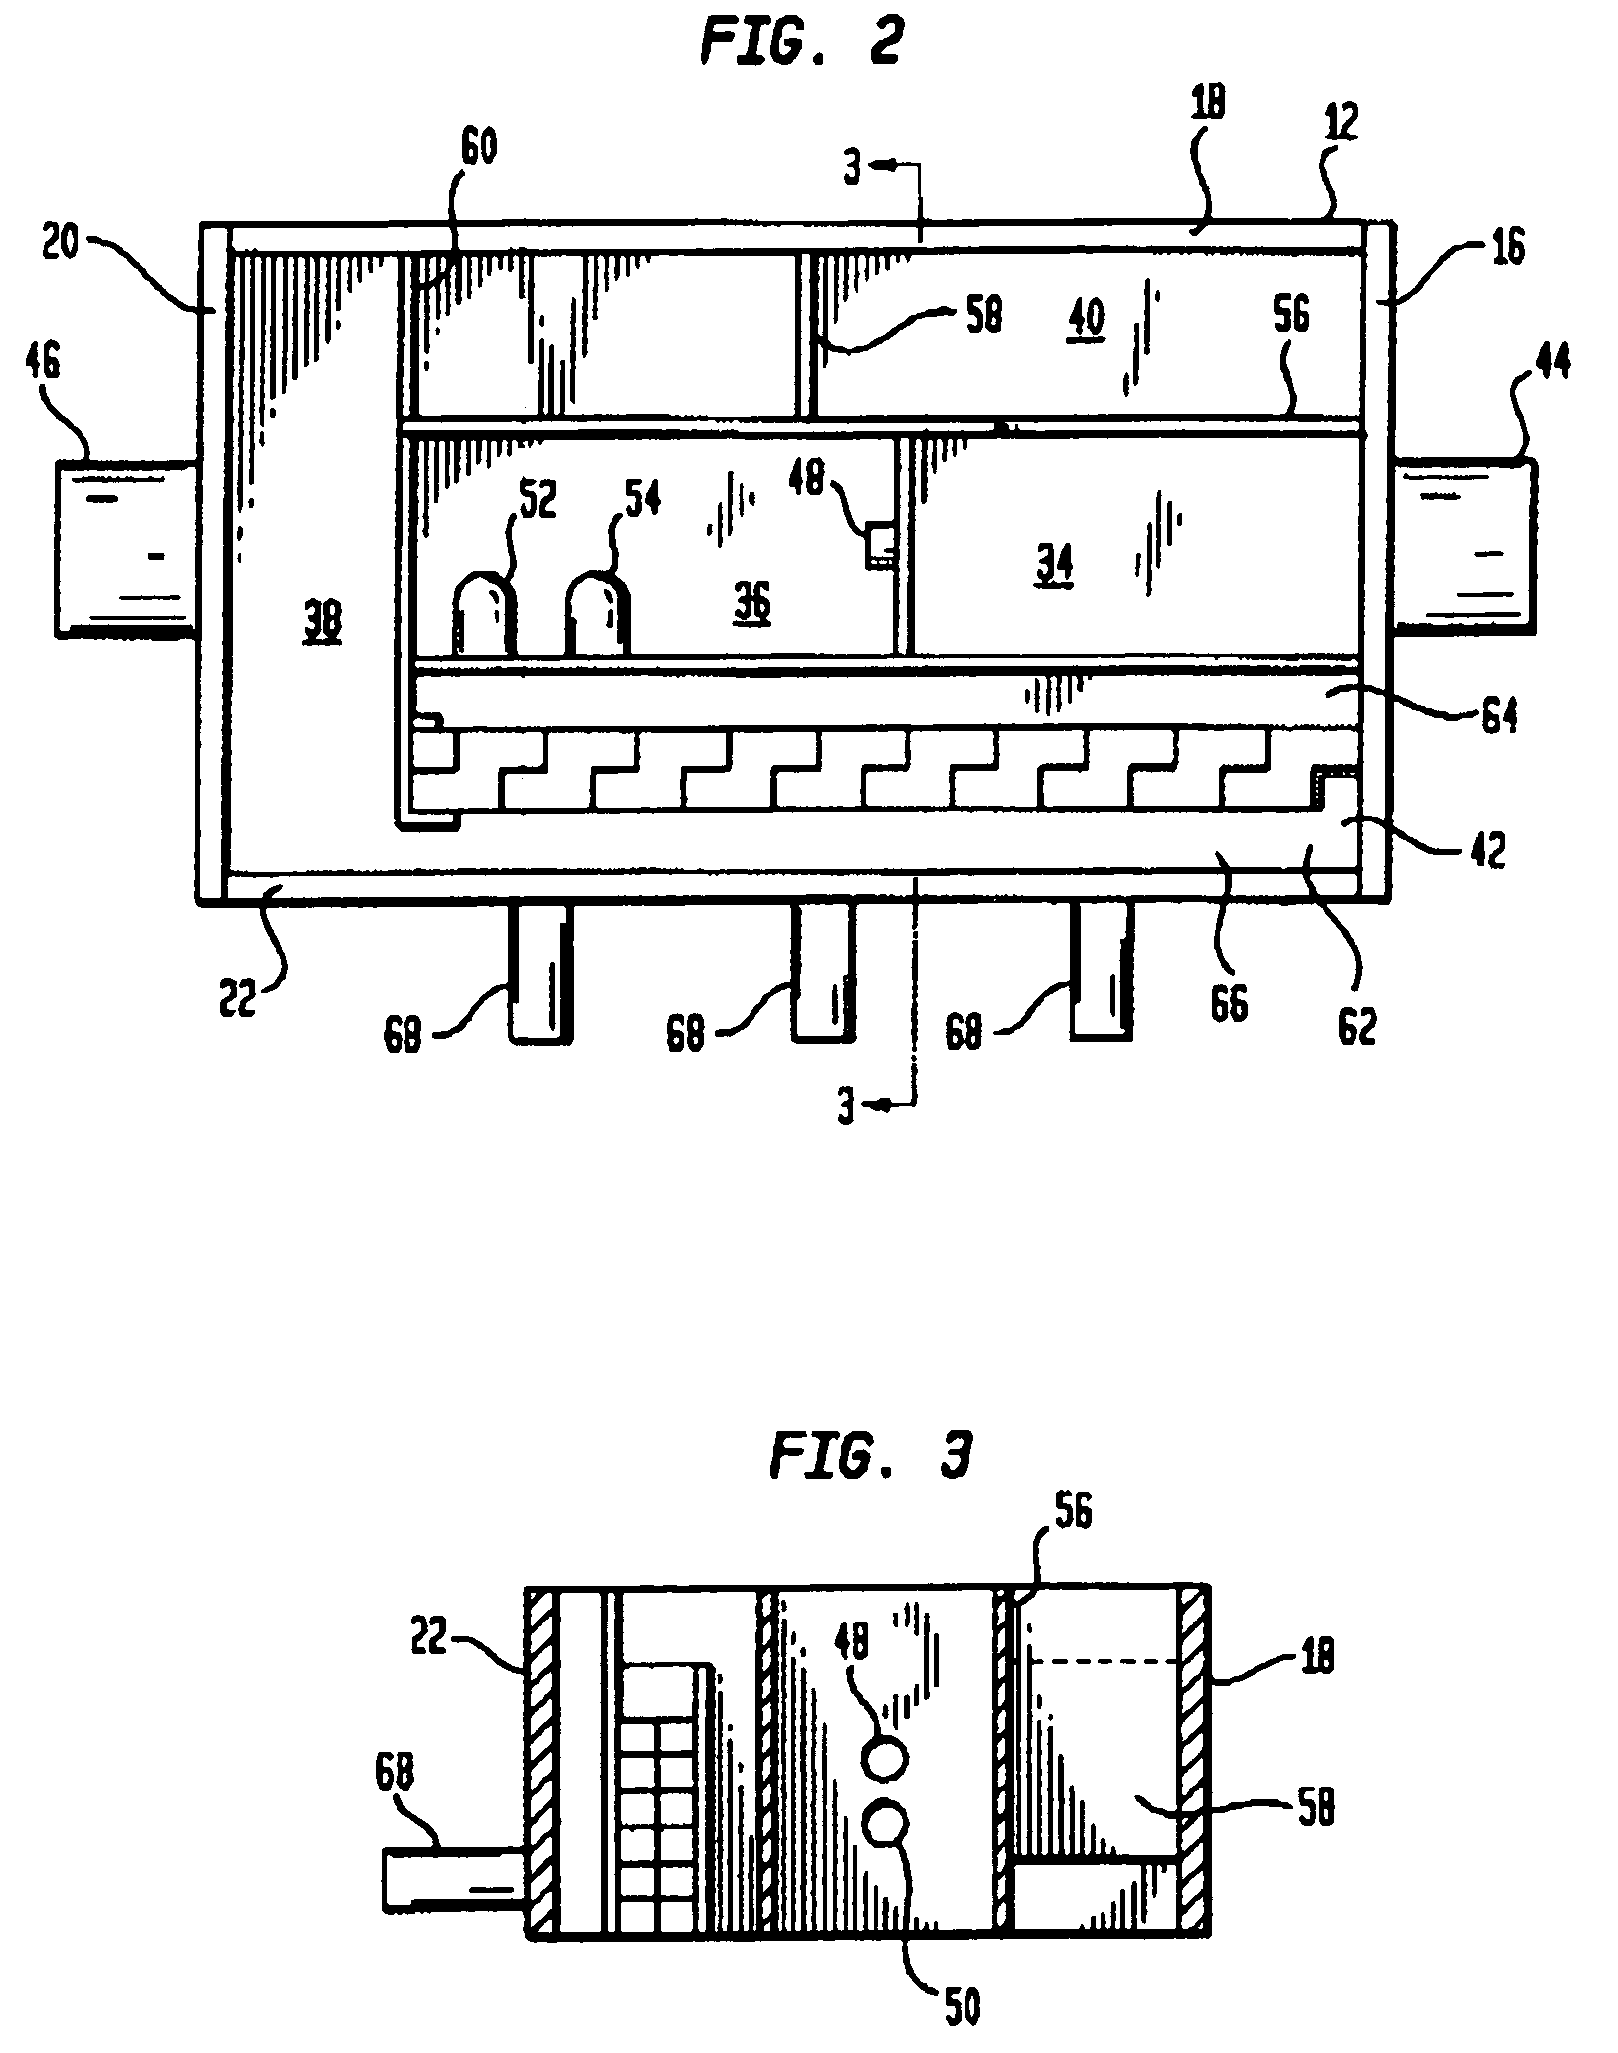 Apparatus for treating storm water